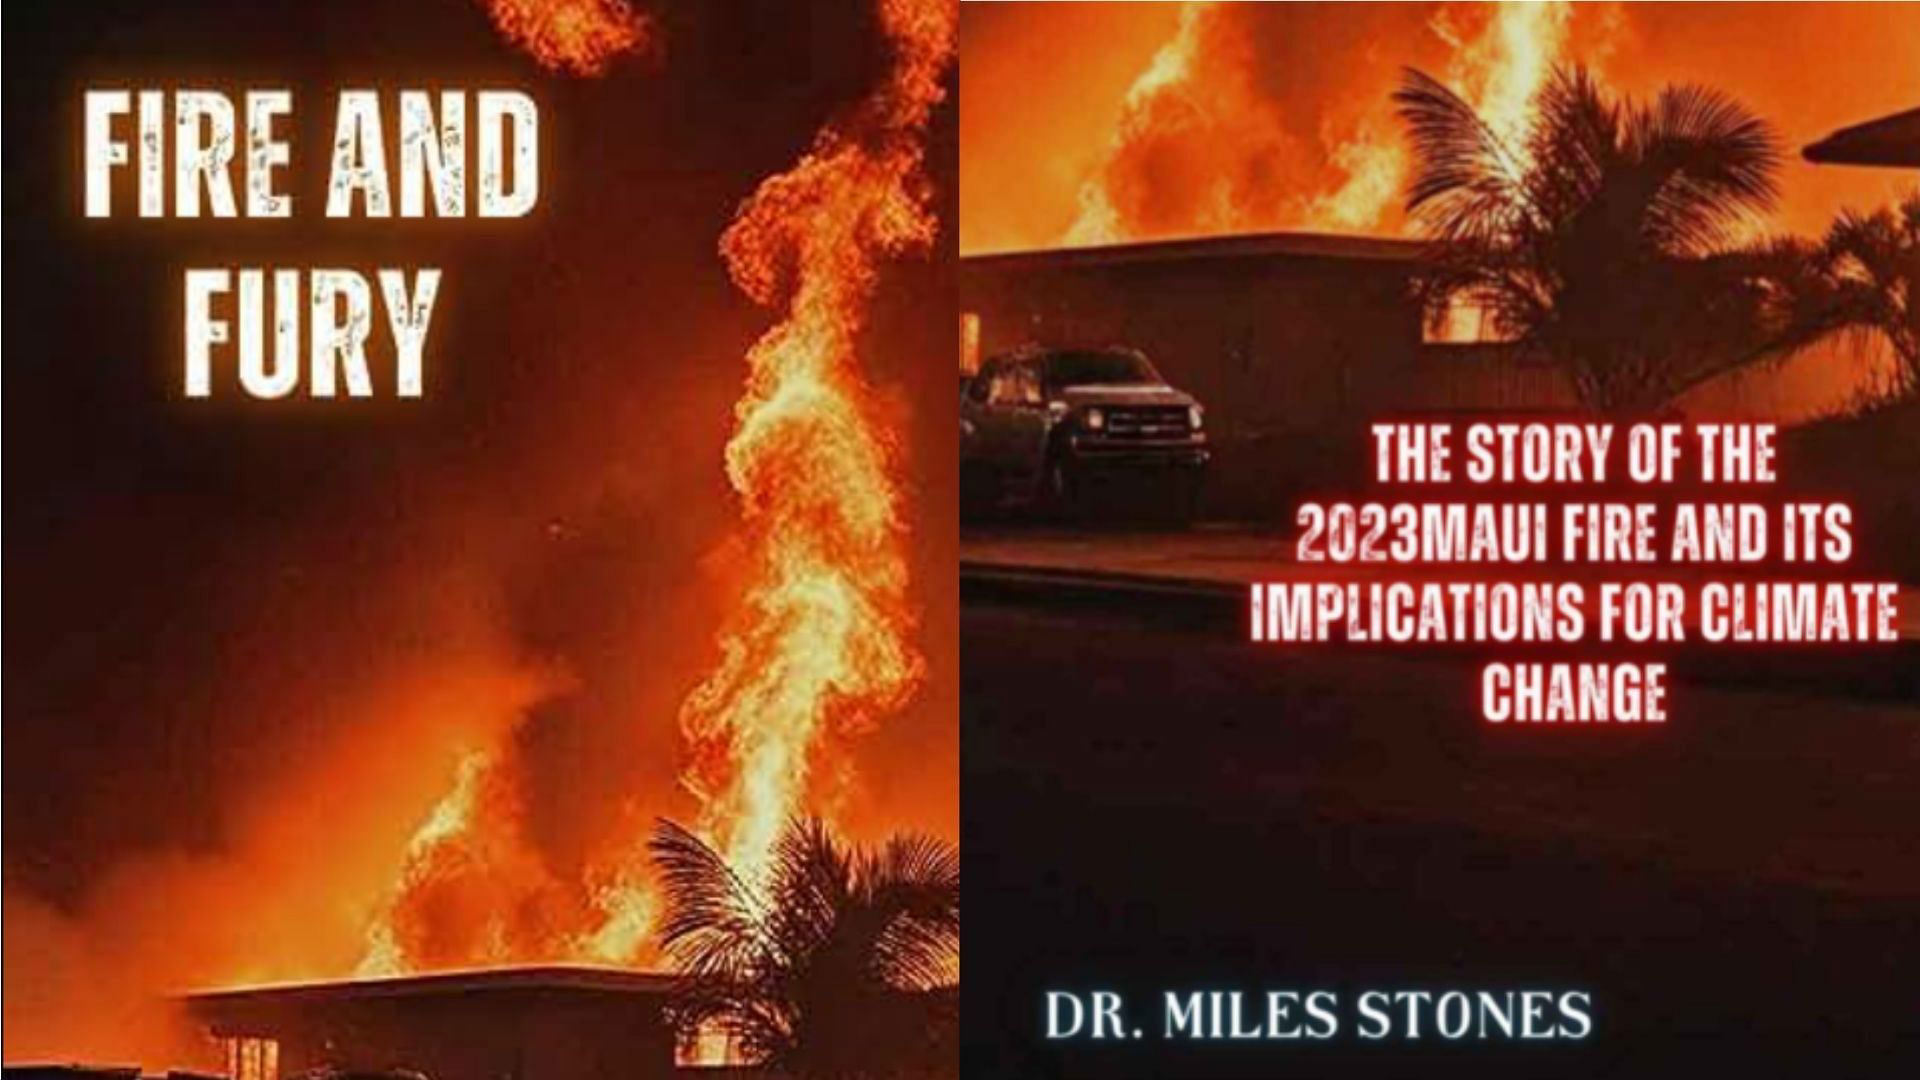 "Almost like they had a written script" Dr. Miles Stones' Fire and